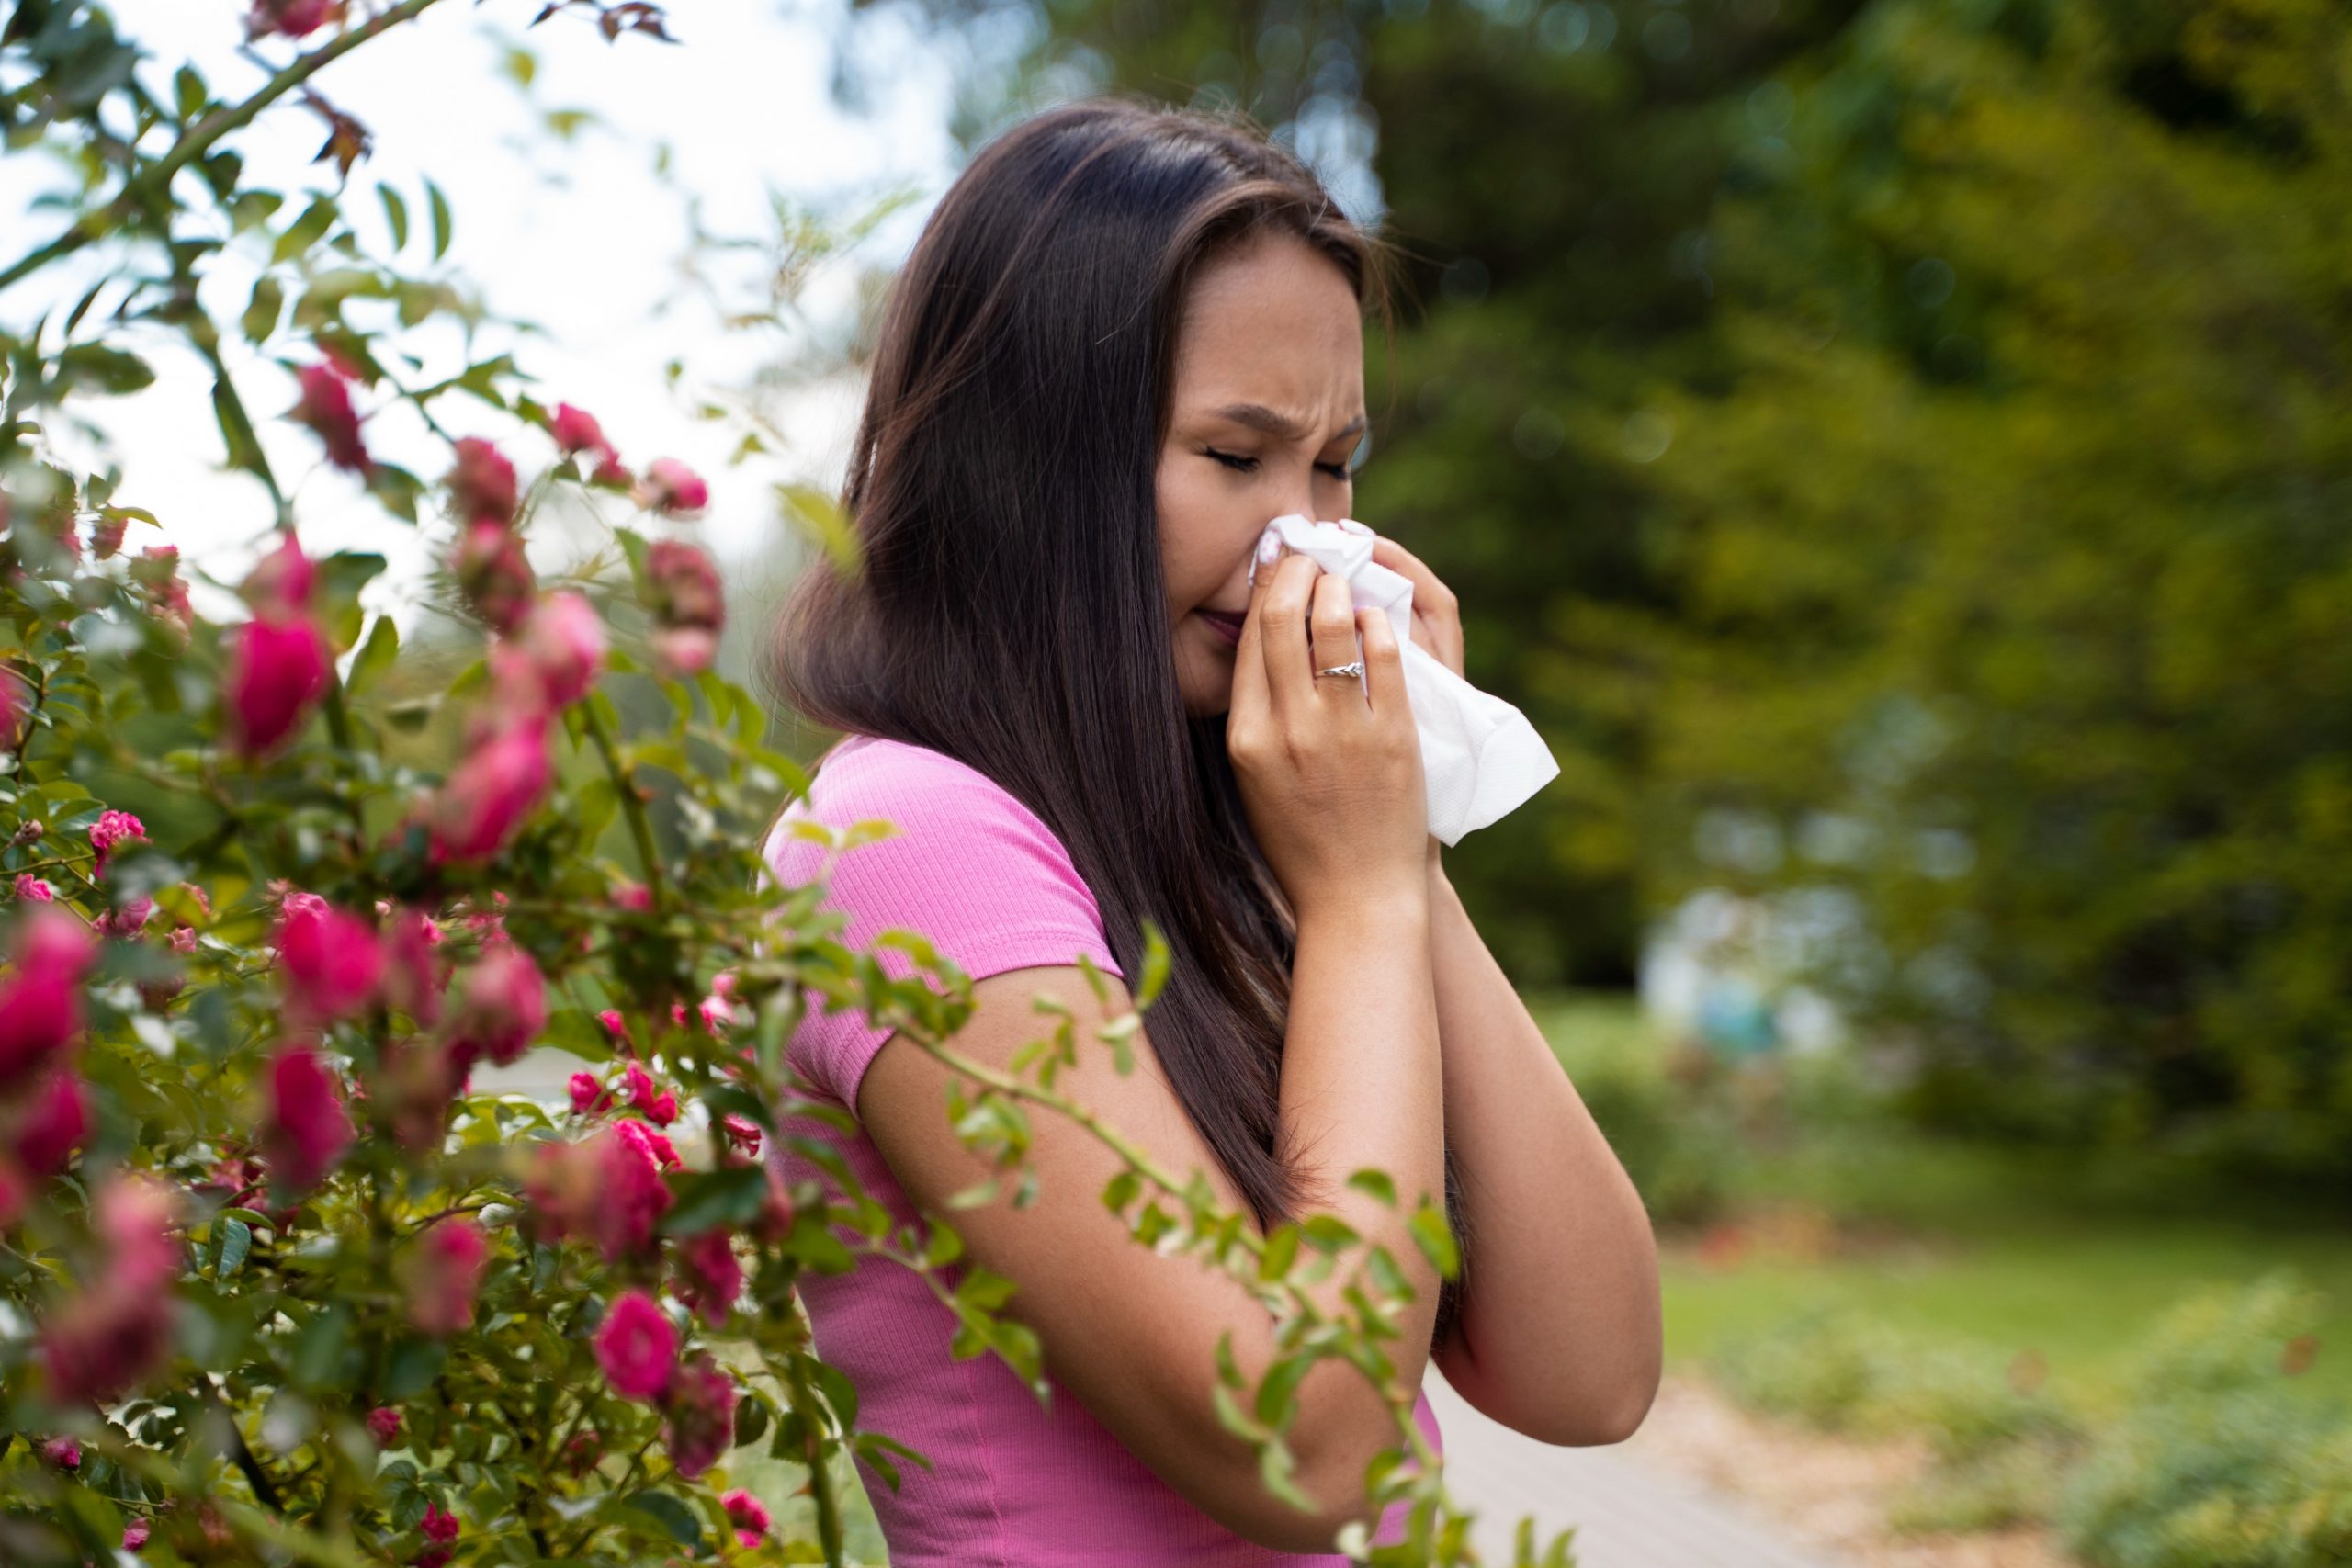 “Navigating the Floral Forecast: Demystifying Pollen Counts for Allergy Warriors”